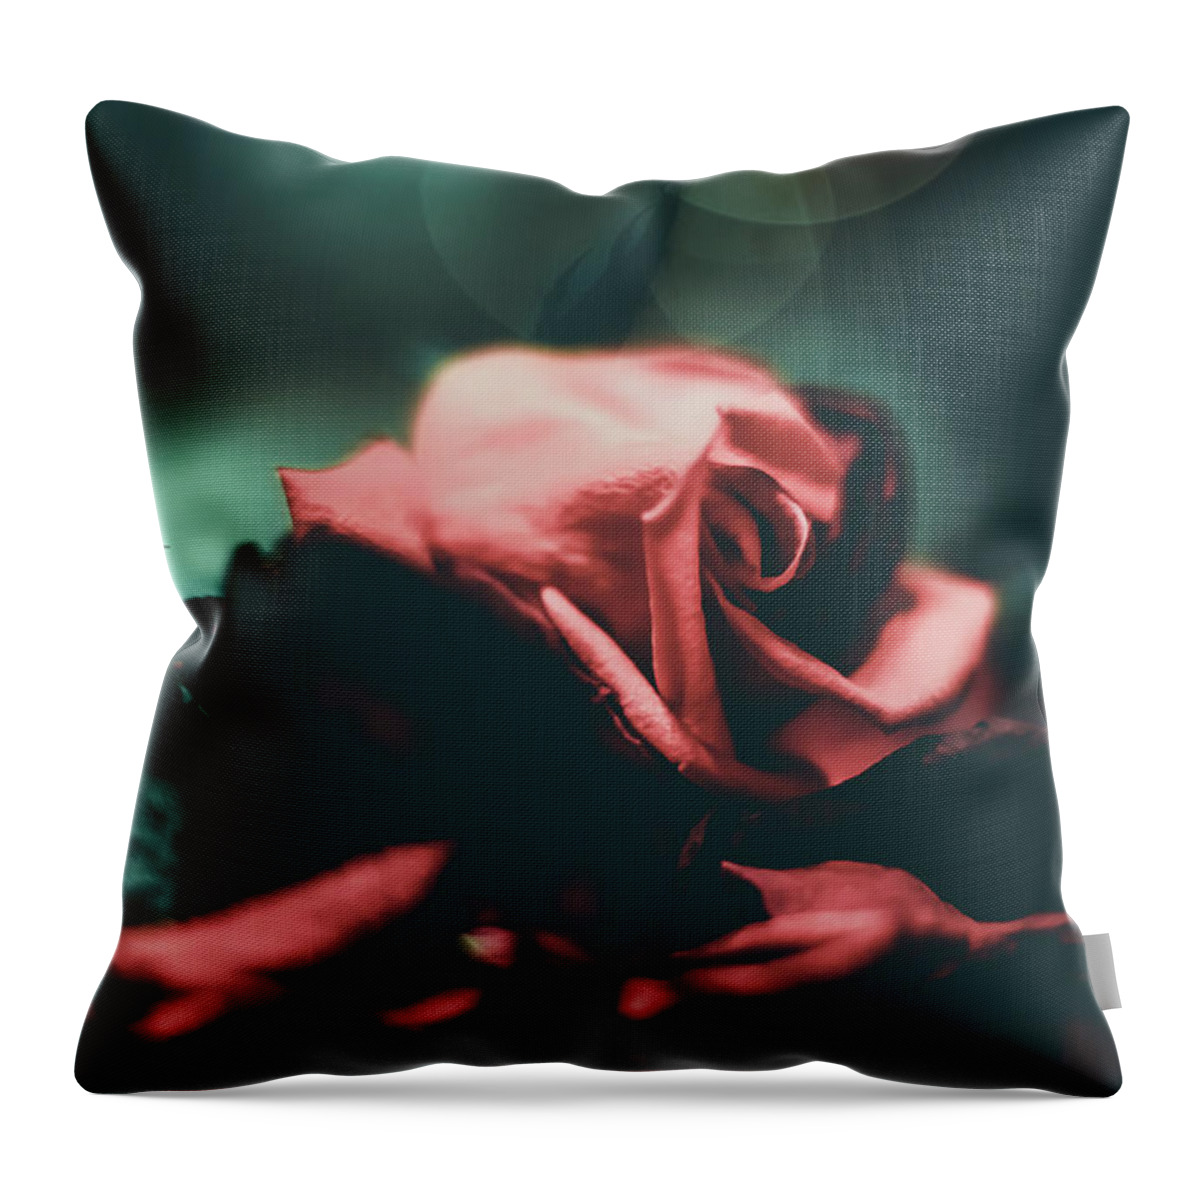 Rose Throw Pillow featuring the photograph Spotlight Rose by Anamar Pictures